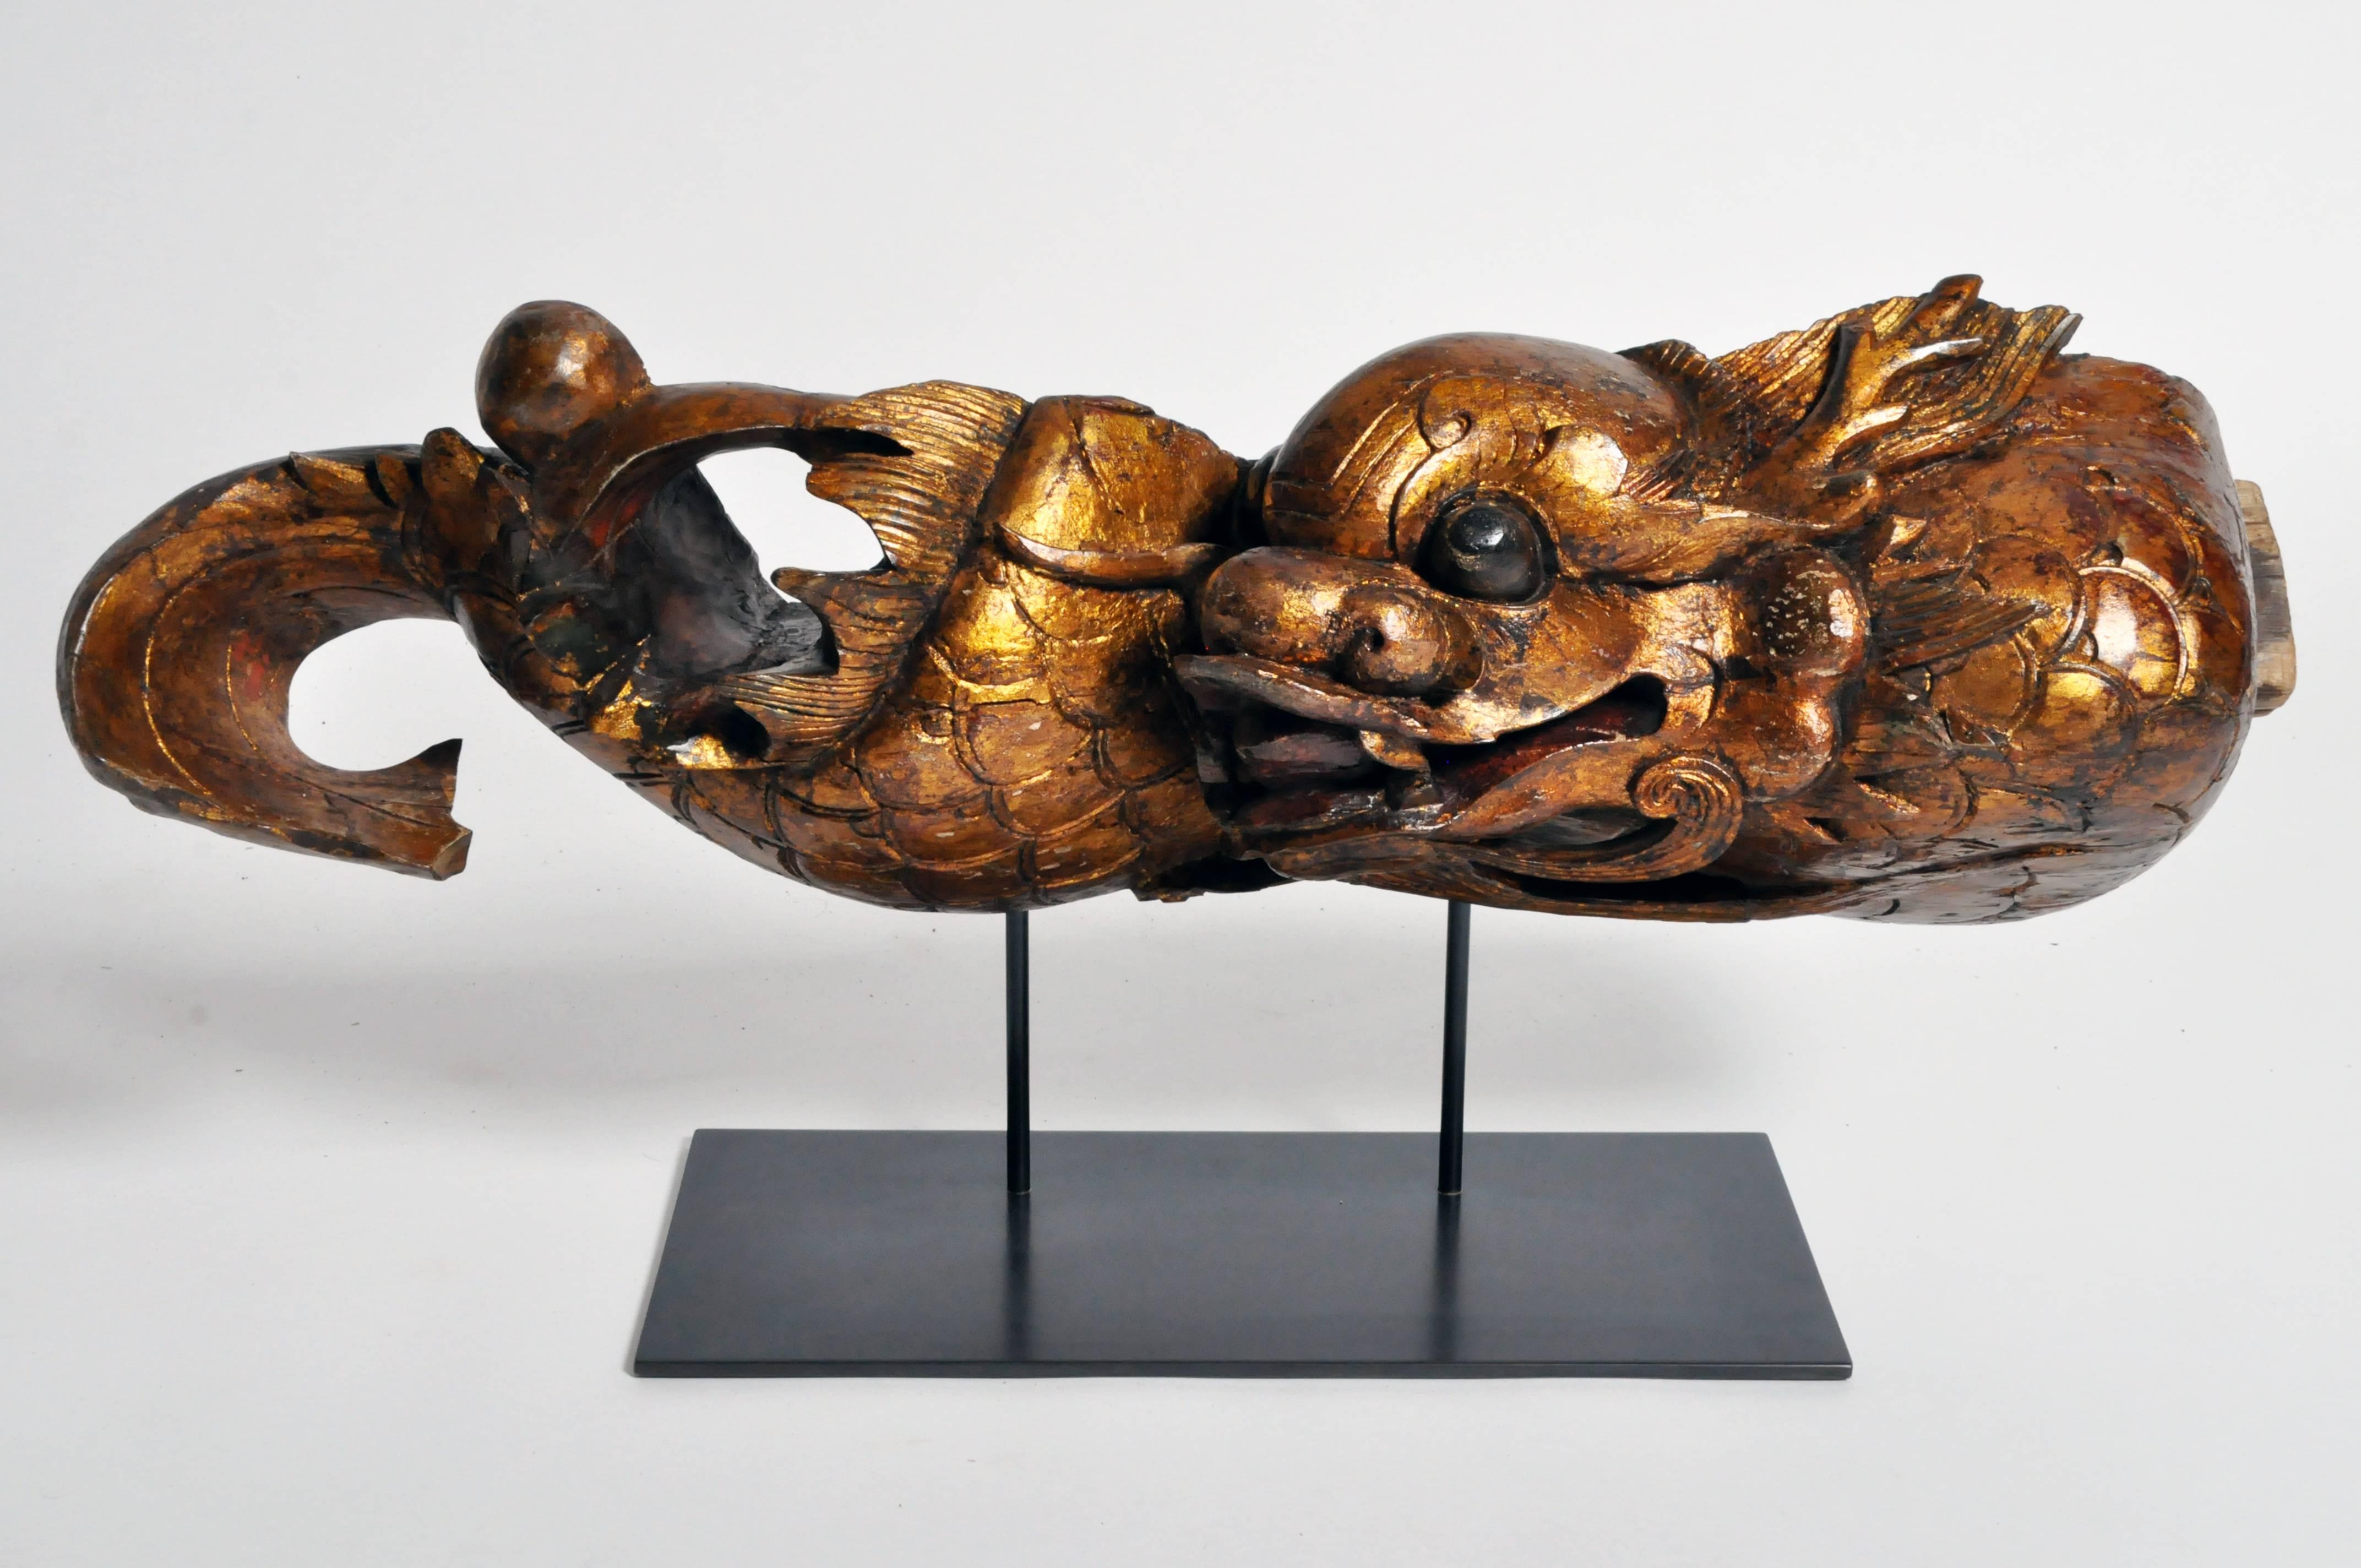 This magnificent and handsome architectural post of a dragon is from Fujian, China and is made from lacquered wood and gold paint, early 1800s. It is from the Qing Dynasty era and has been mounted on a metal base for display.

Chinese entrances